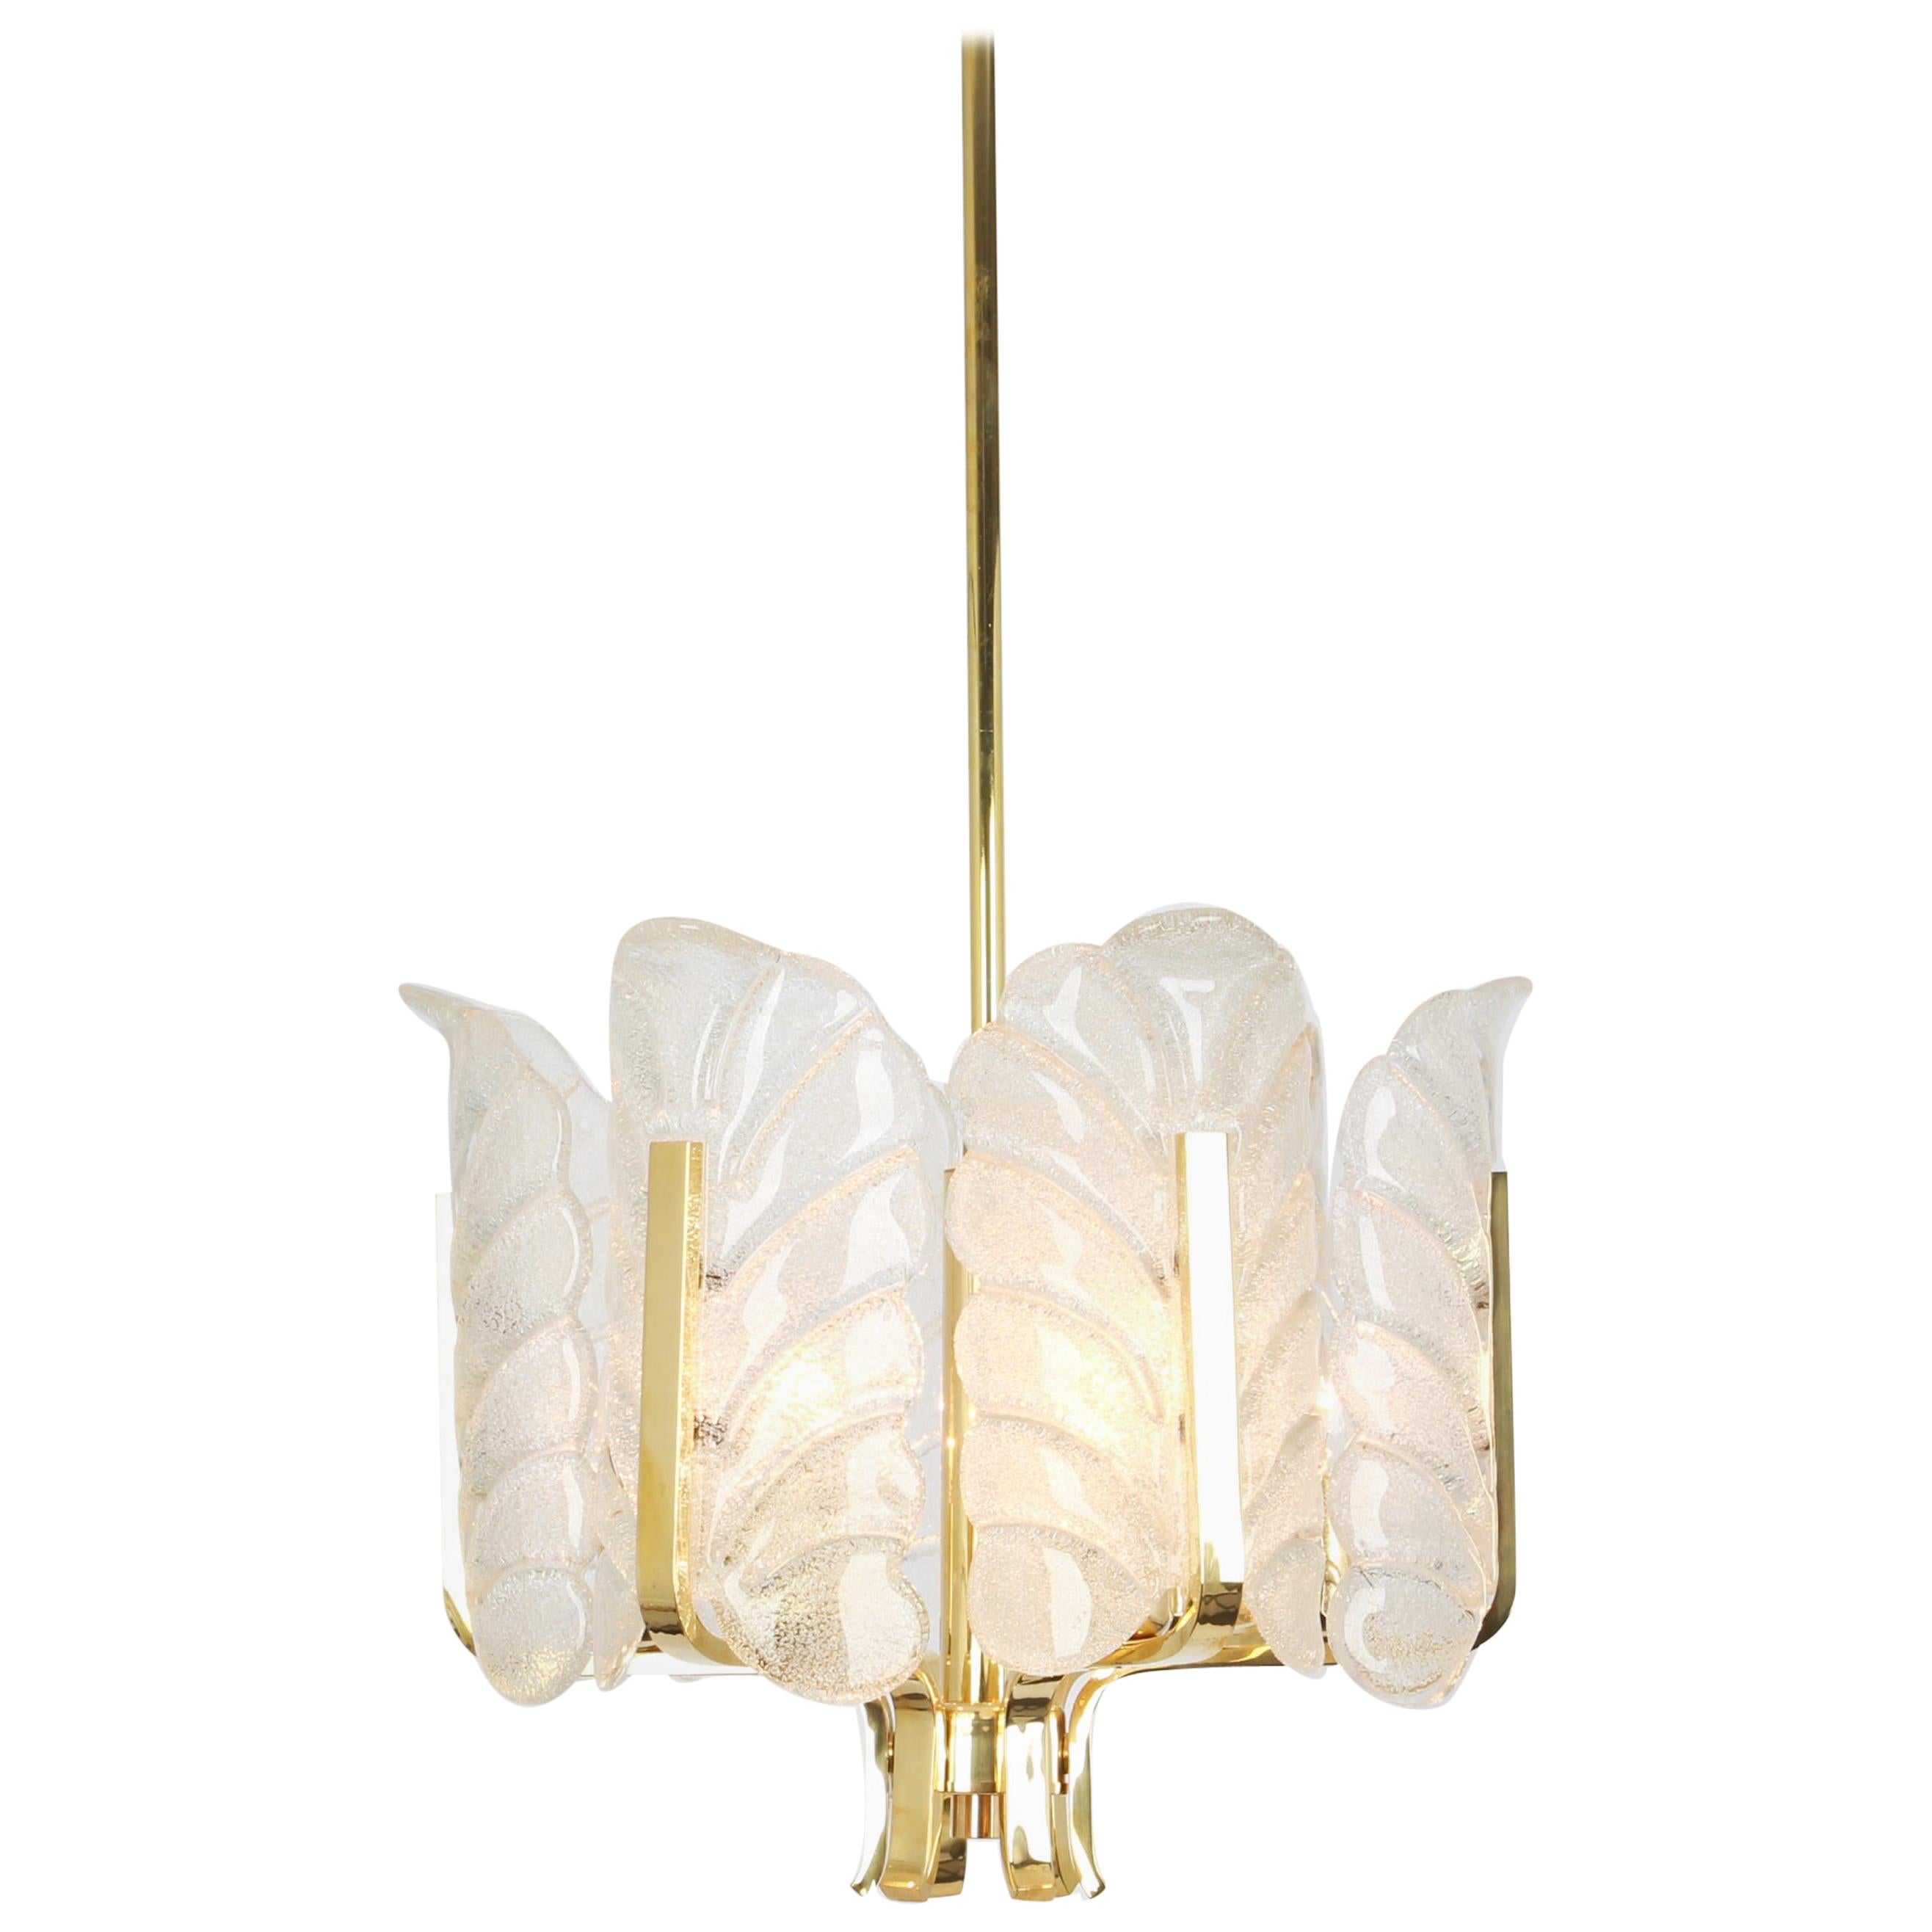 1 of 2 Stunning Carl Fagerlund Chandelier Murano Glass Leaves, 1960s For Sale